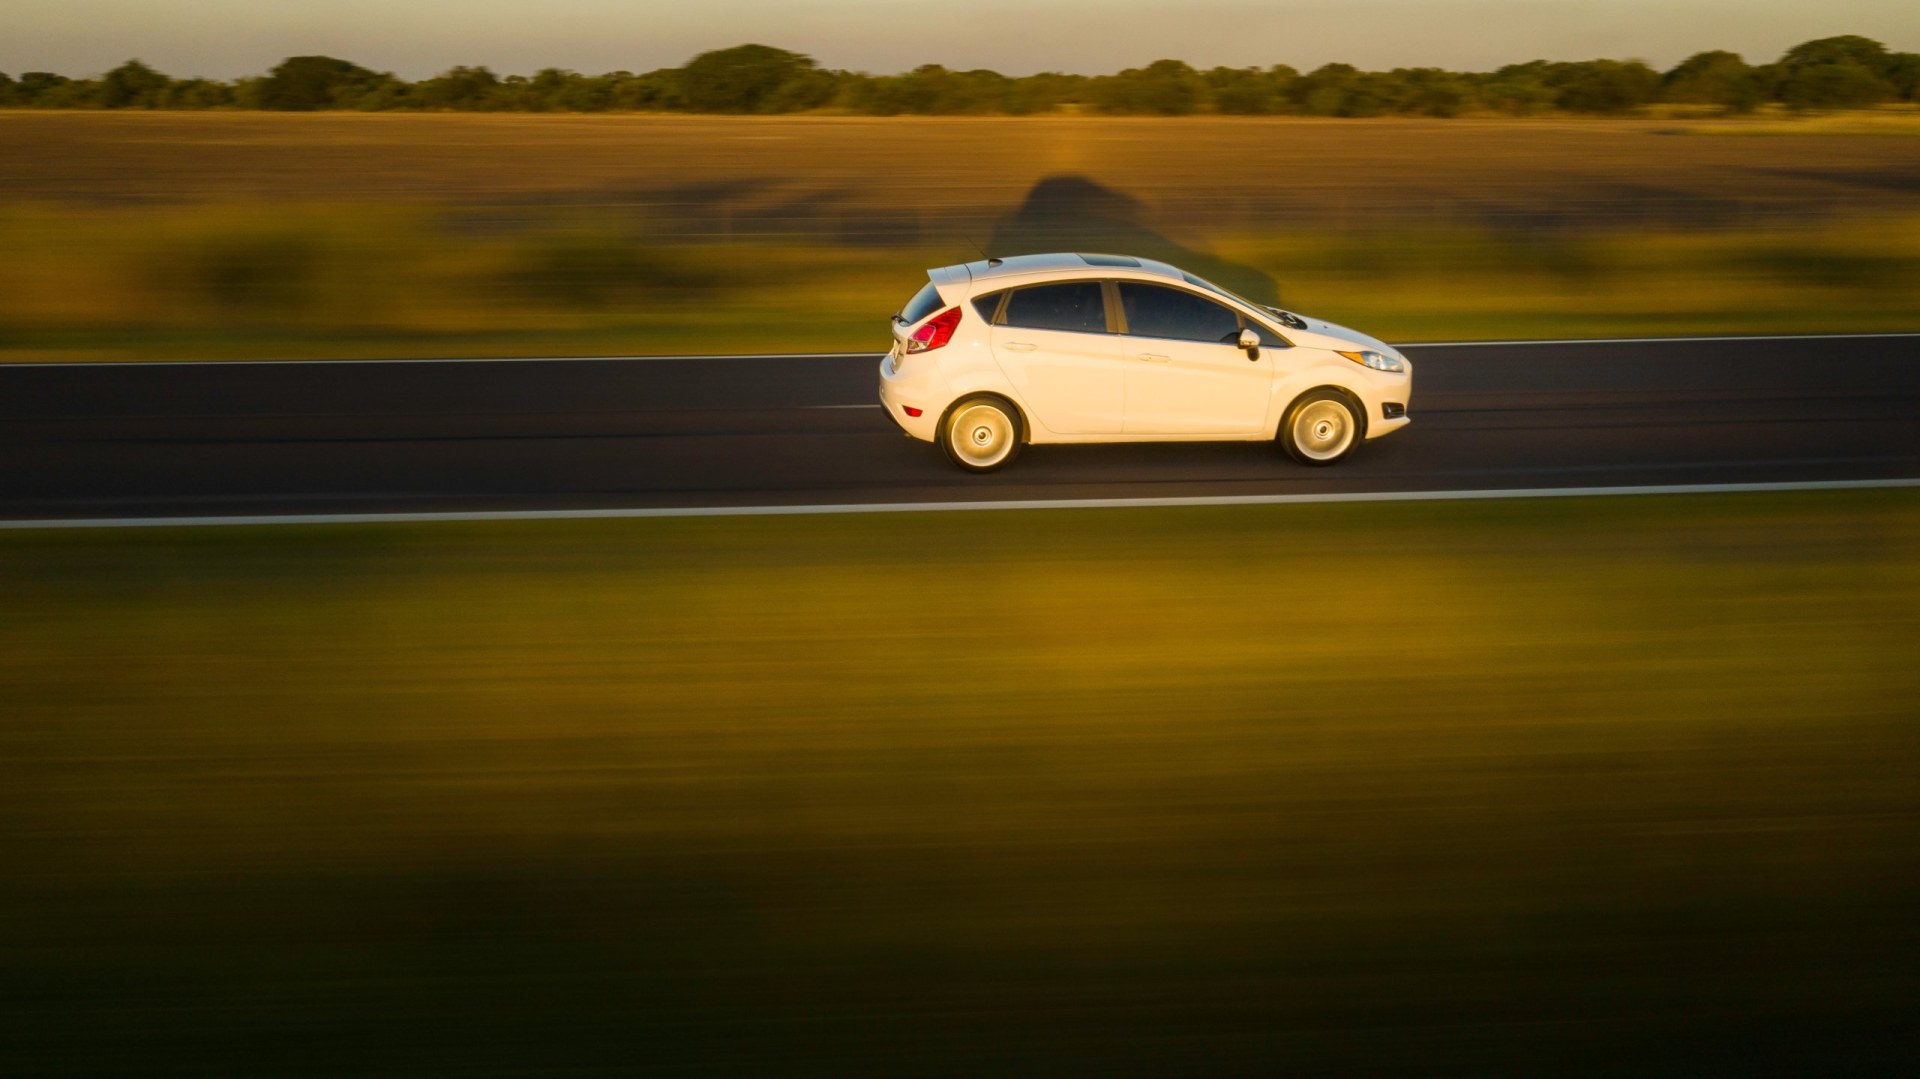 2016 Ford Fiesta Panning photography of a car on the road. Sunset background. Drone shot